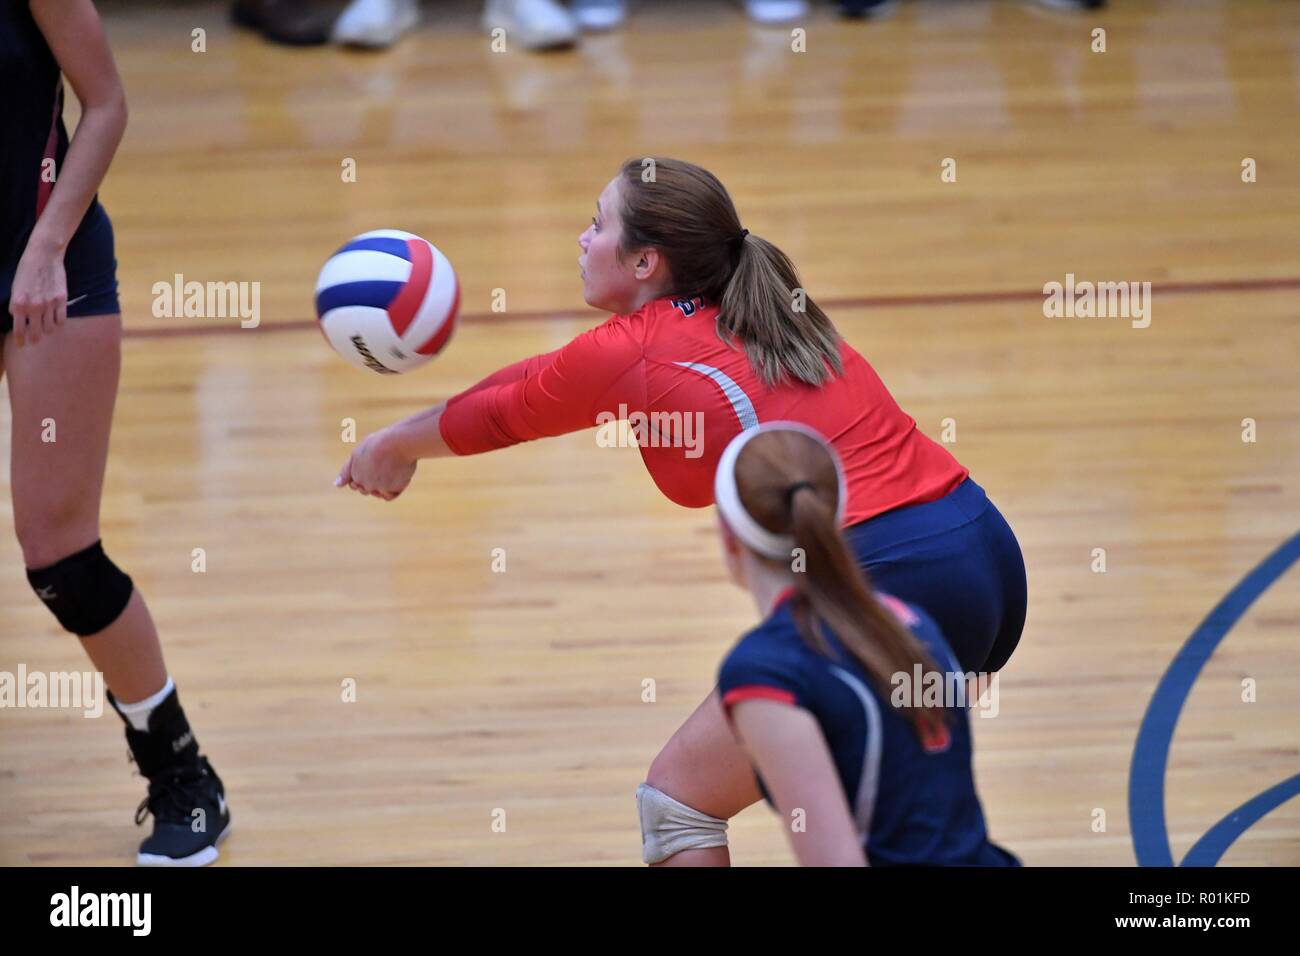 Player accepting and returning an opposing serve at mid-court. USA Stock Photo